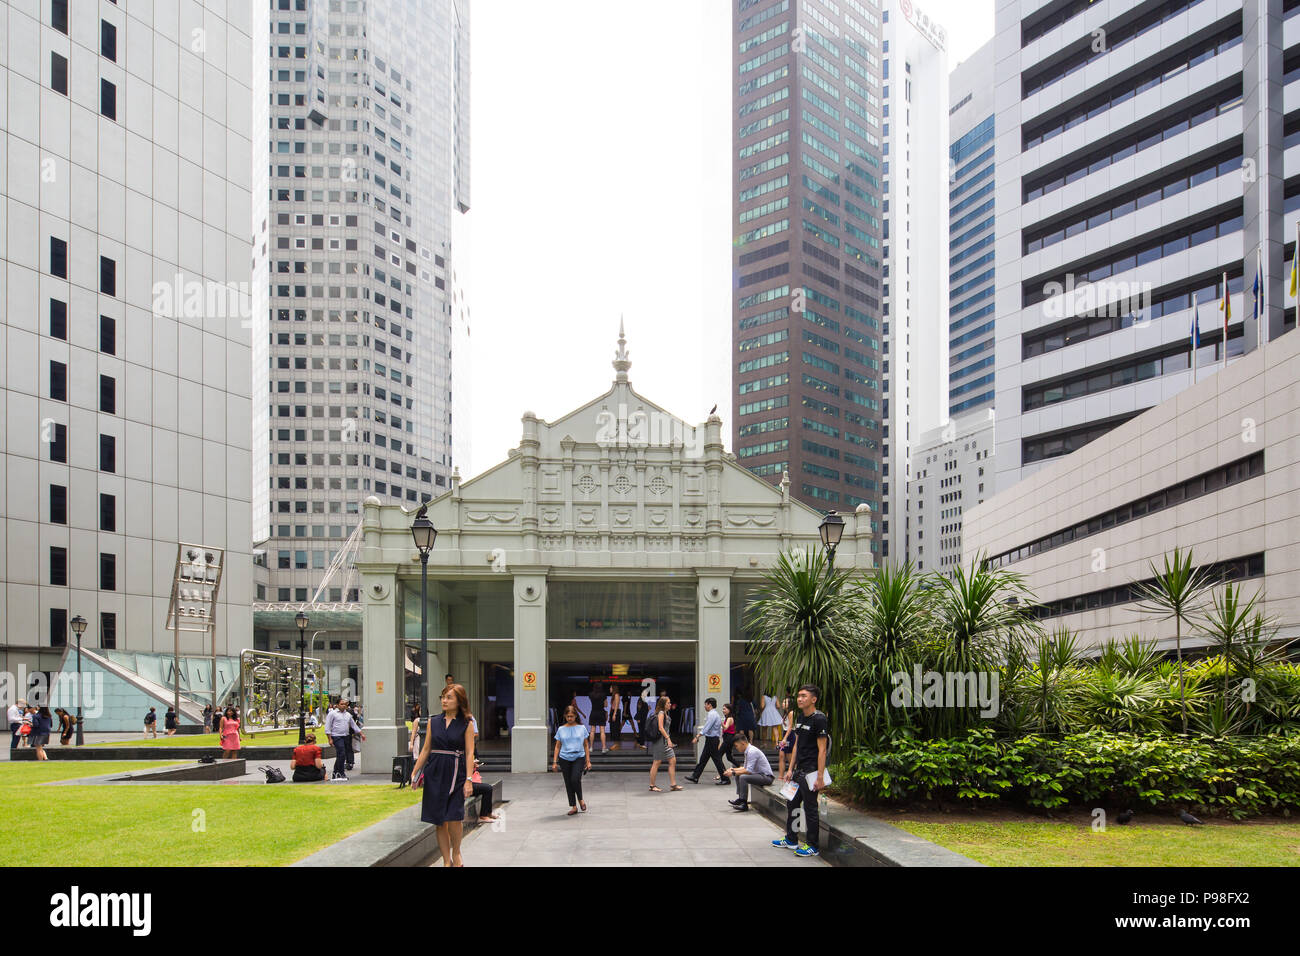 Frontage view of Raffles Place MRT station at a business district with towering commercial buildings, Singapore. Stock Photo